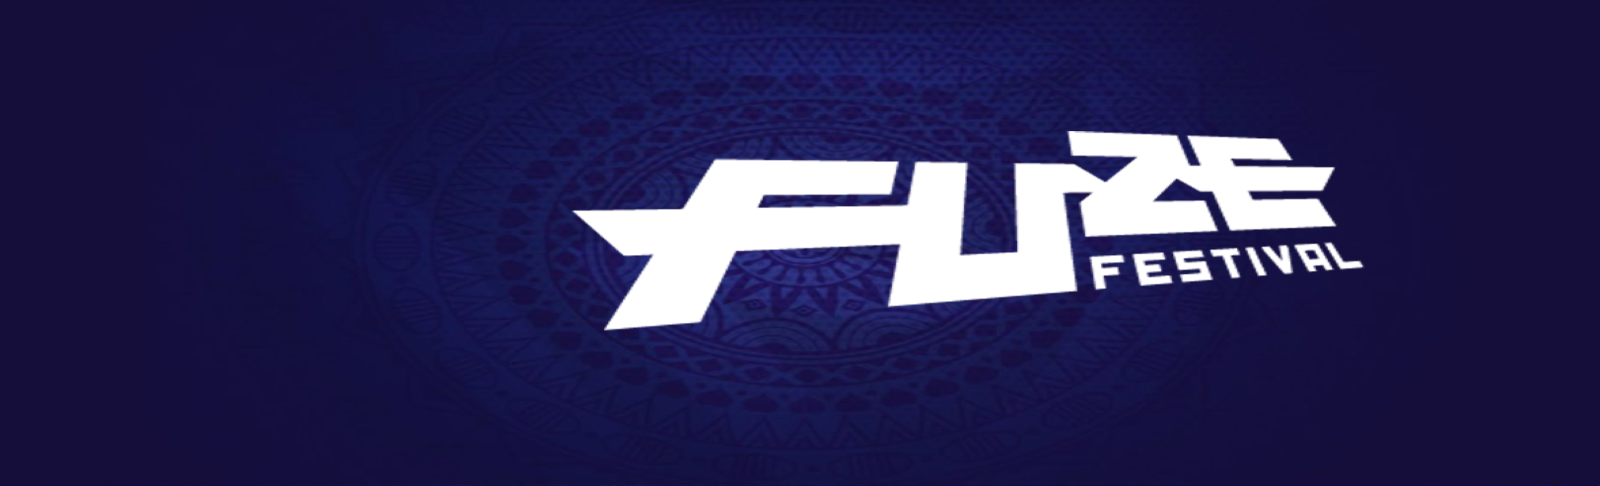 Fuze Home Page Banner